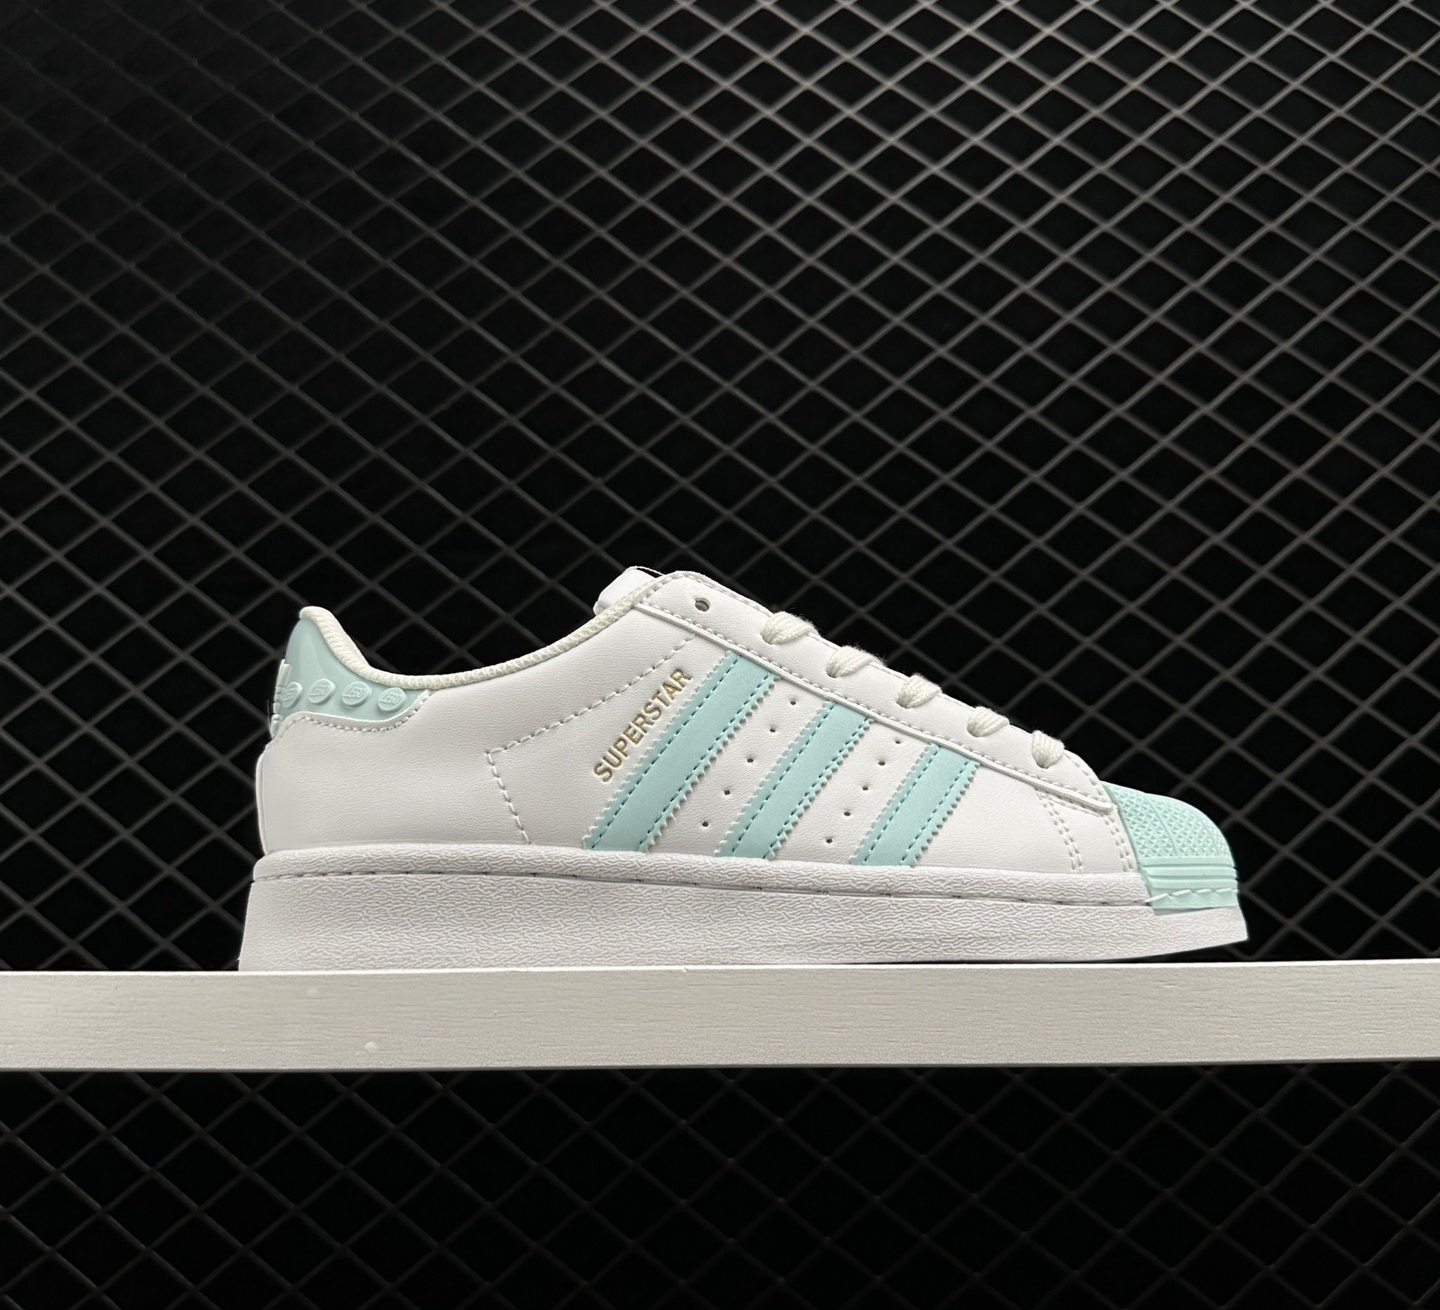 Adidas Superstar White GW7255 – Classic Style and Comfort